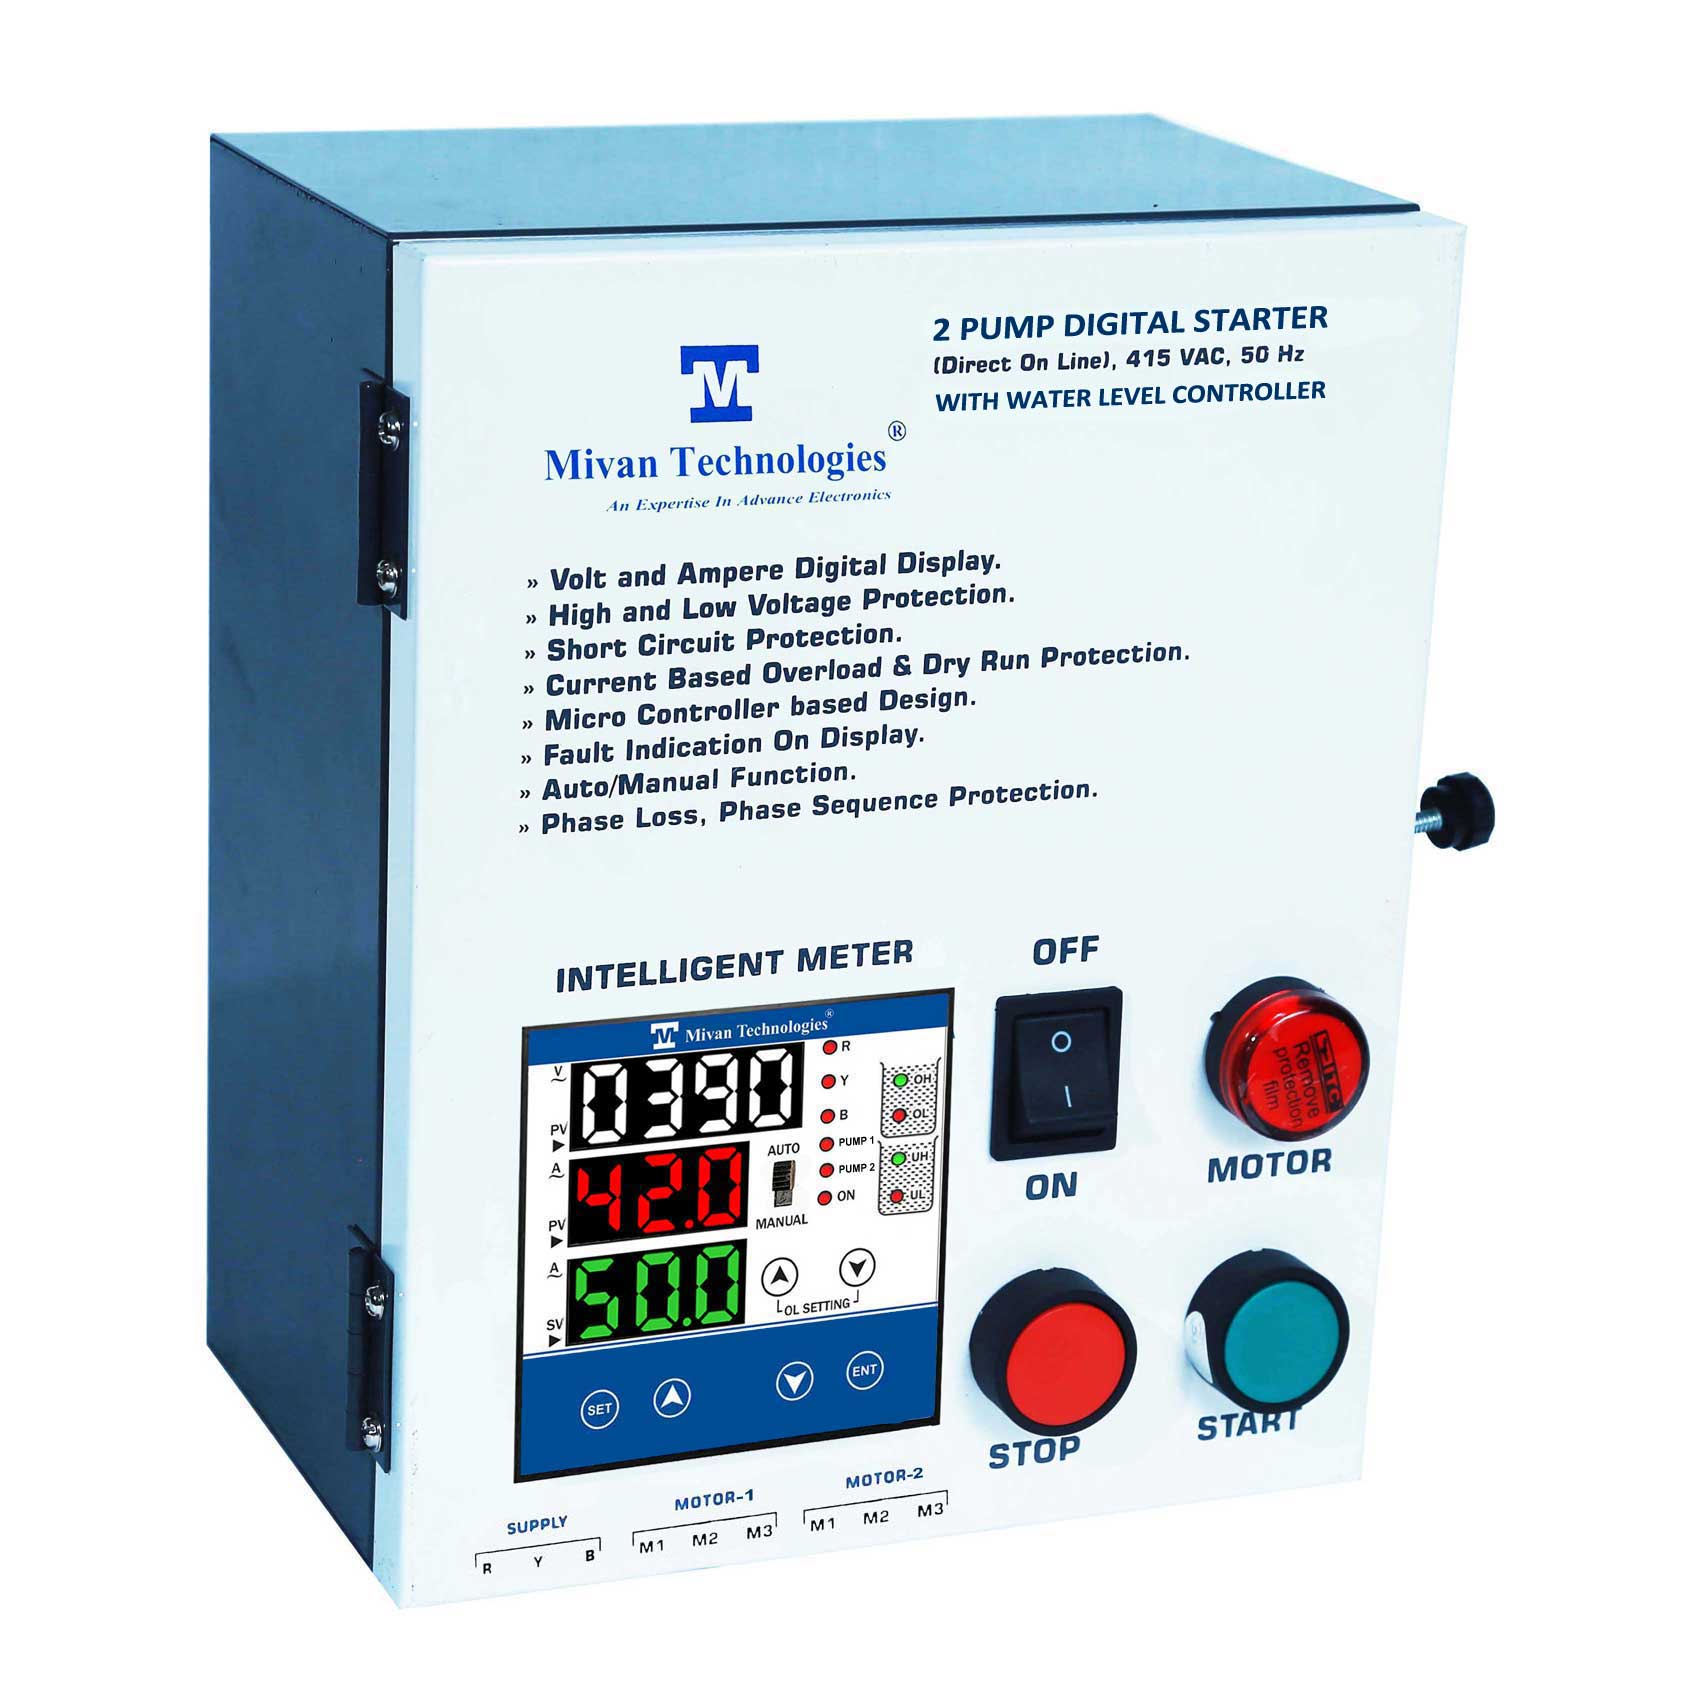 DOL DP 3 PHASE 2 PUMP DOL STARTER with water level controller HV LV OL Dry protection with Auto switch spp and timer suitable up to 15 HP operate 2 pump one by one